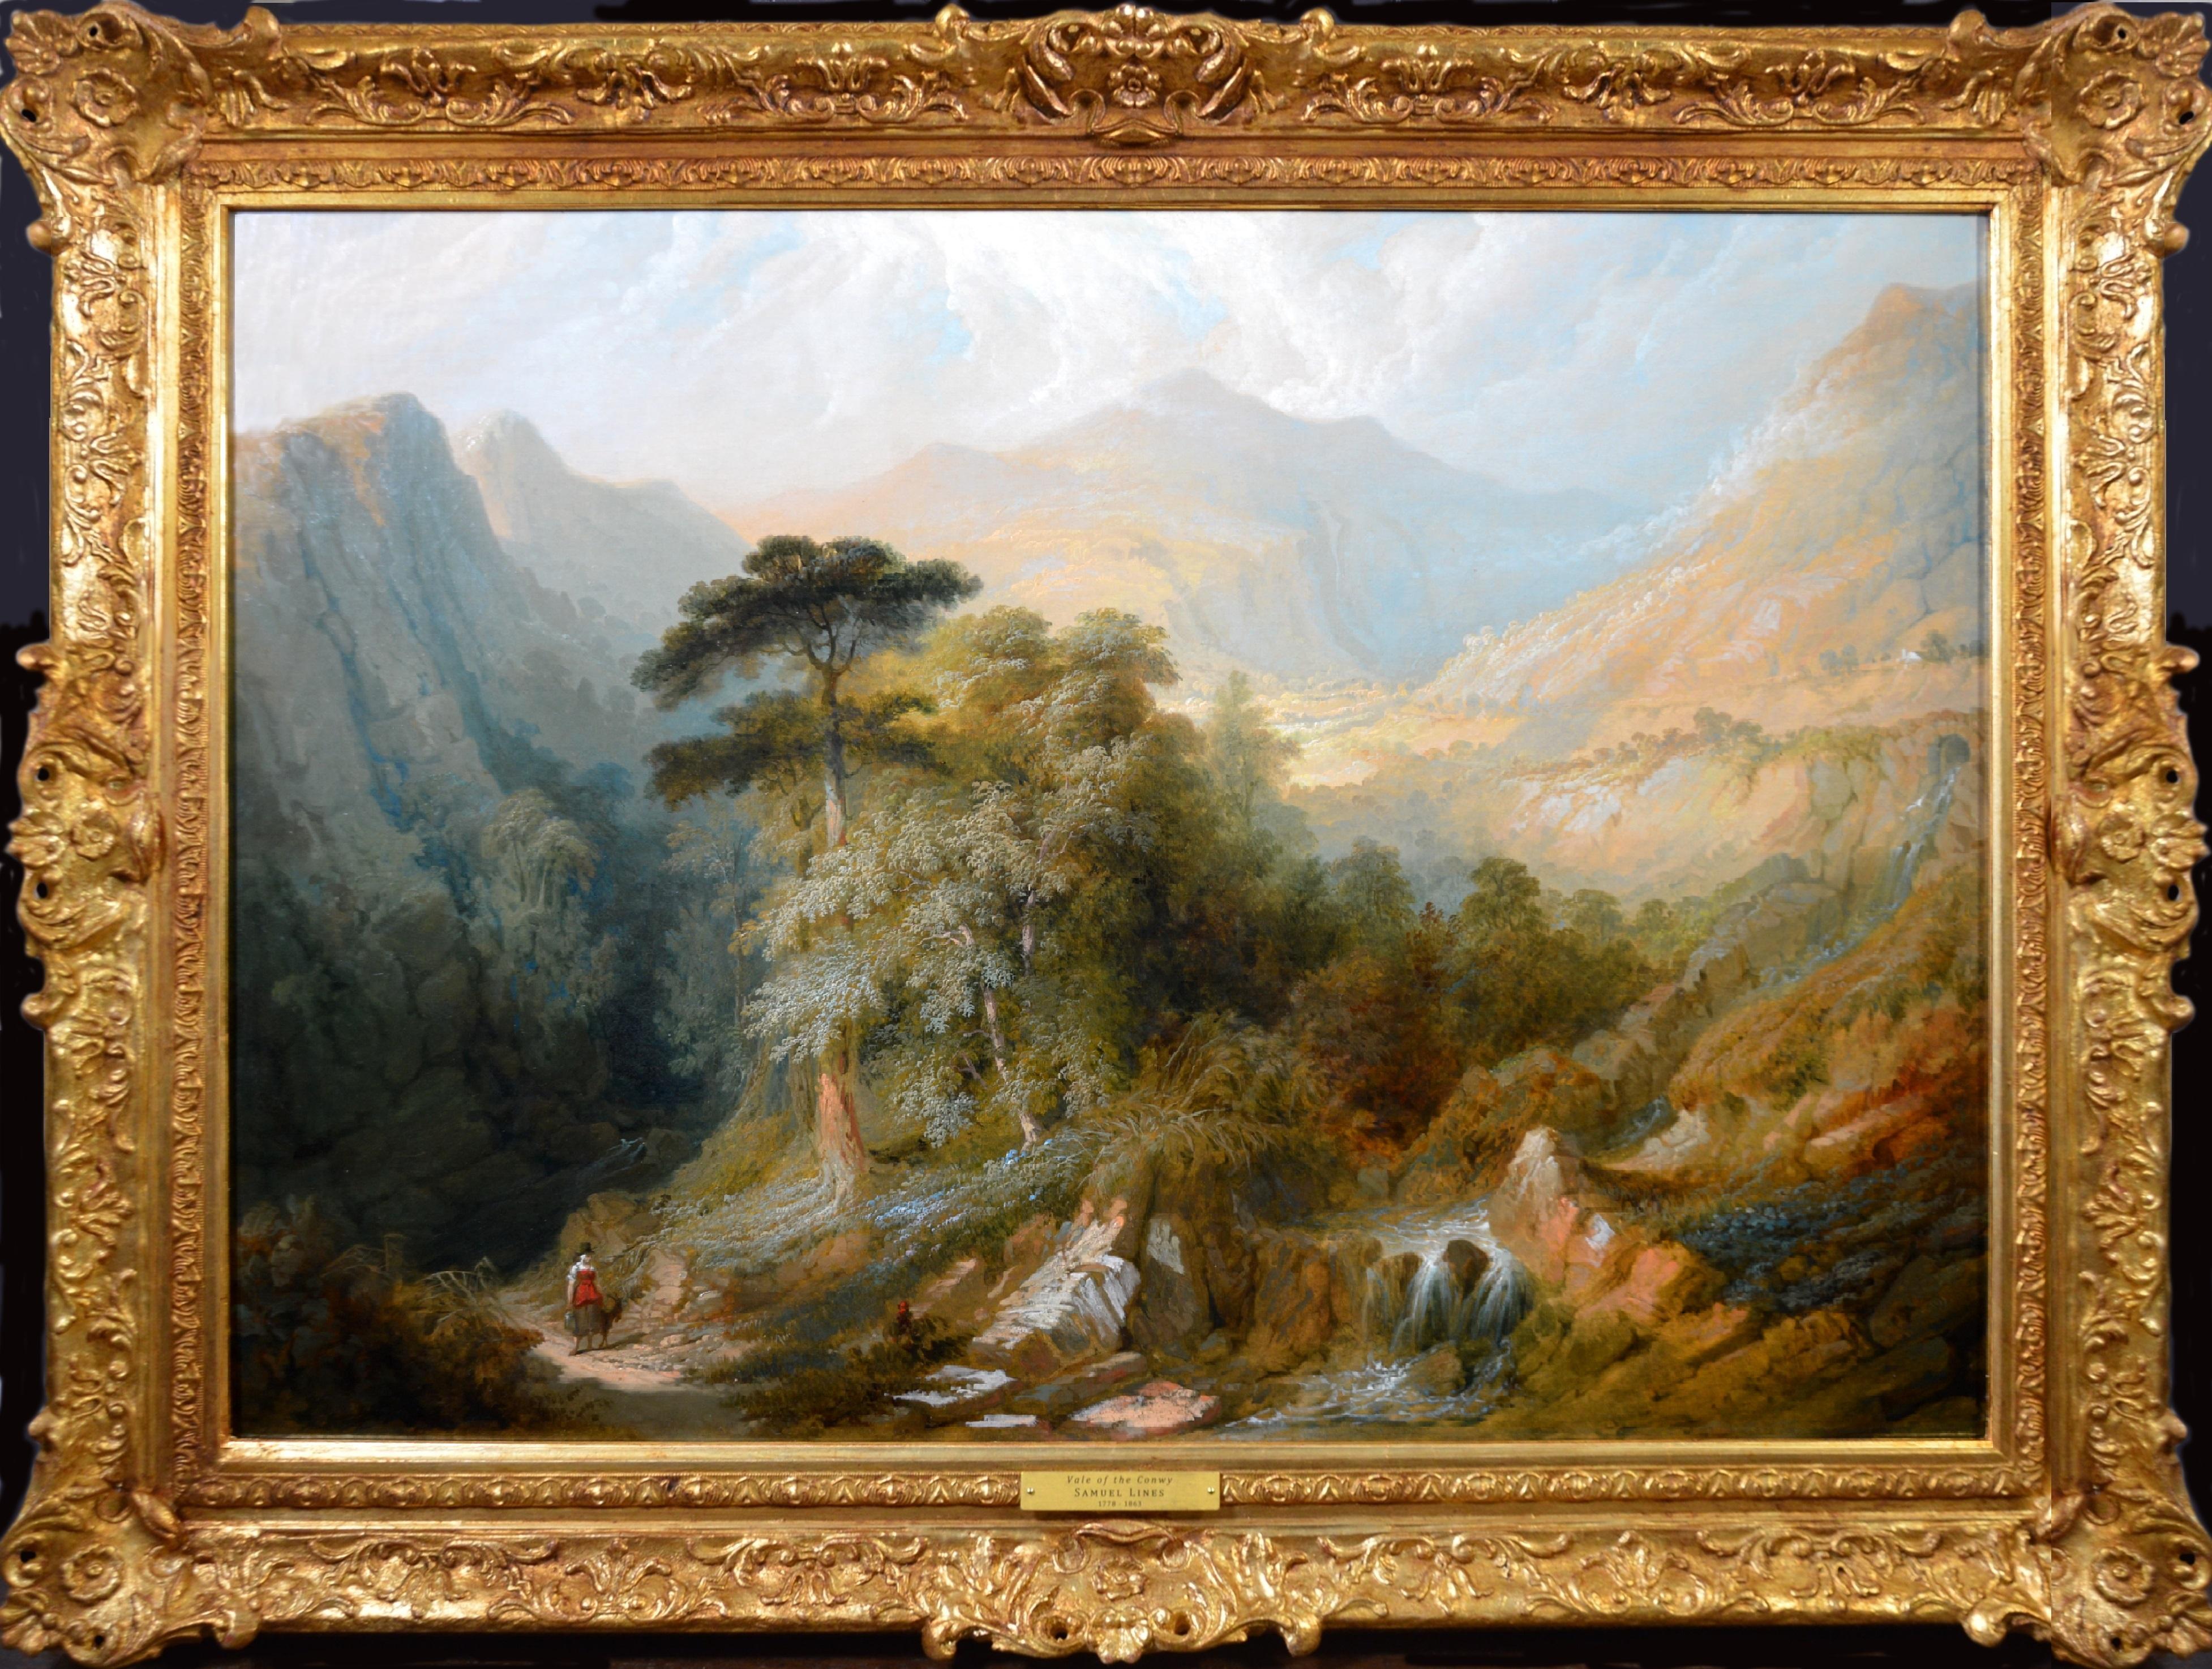 ‘Vale of the Conwy’ by Samuel Lines (1778-1863). The painting – which depicts a single female figure in Welsh dress walking with a goat in an extensive mountain landscape – is signed by the artist and inscribed verso.  

Academy Fine Paintings only